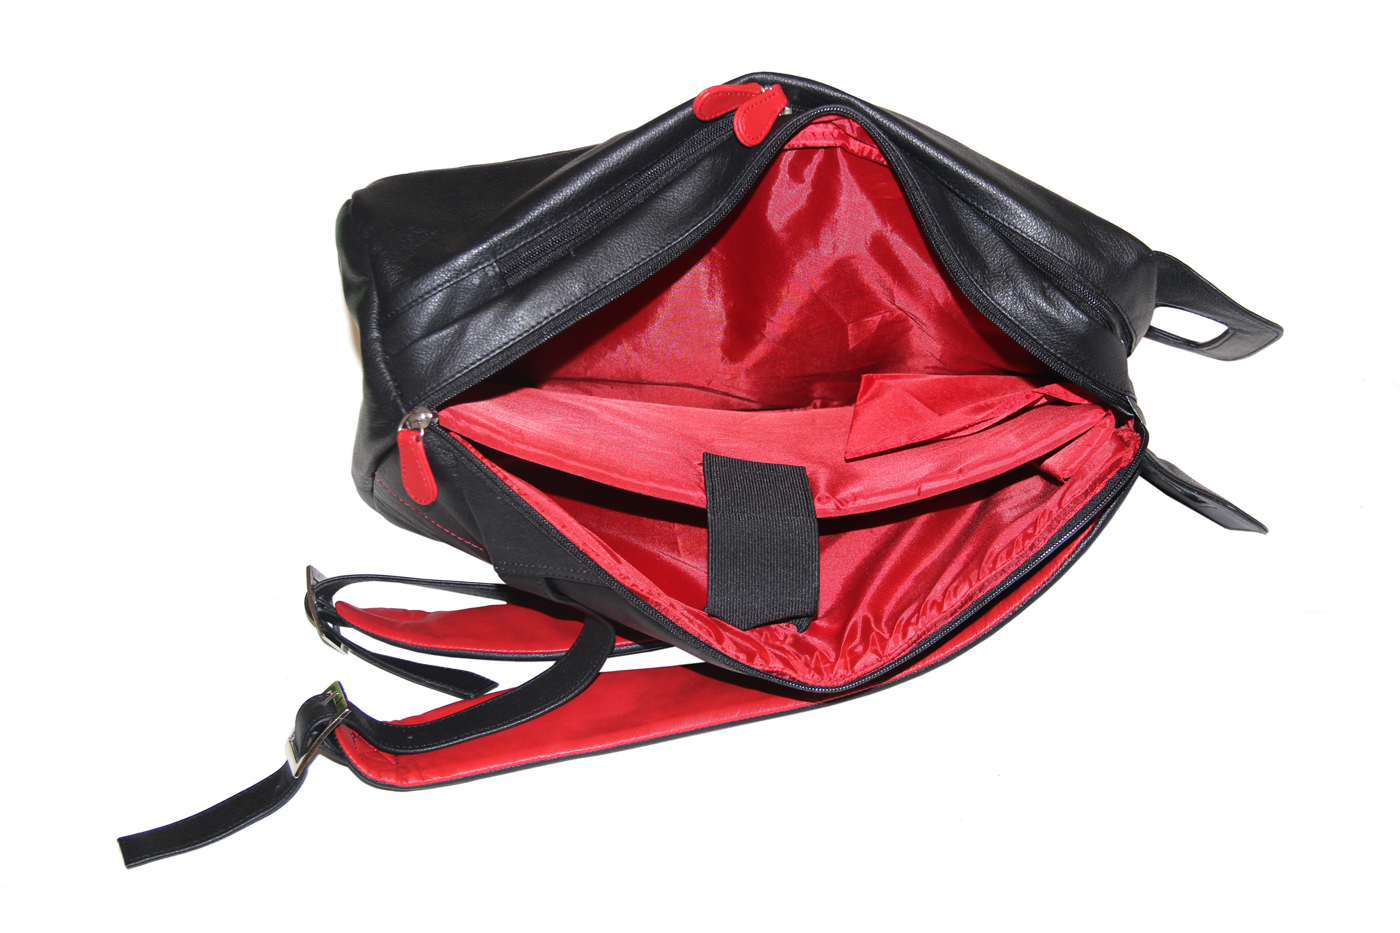 LC26-Harvey-Unisex backpack for laptop bag in Genuine Leather - Black/Red